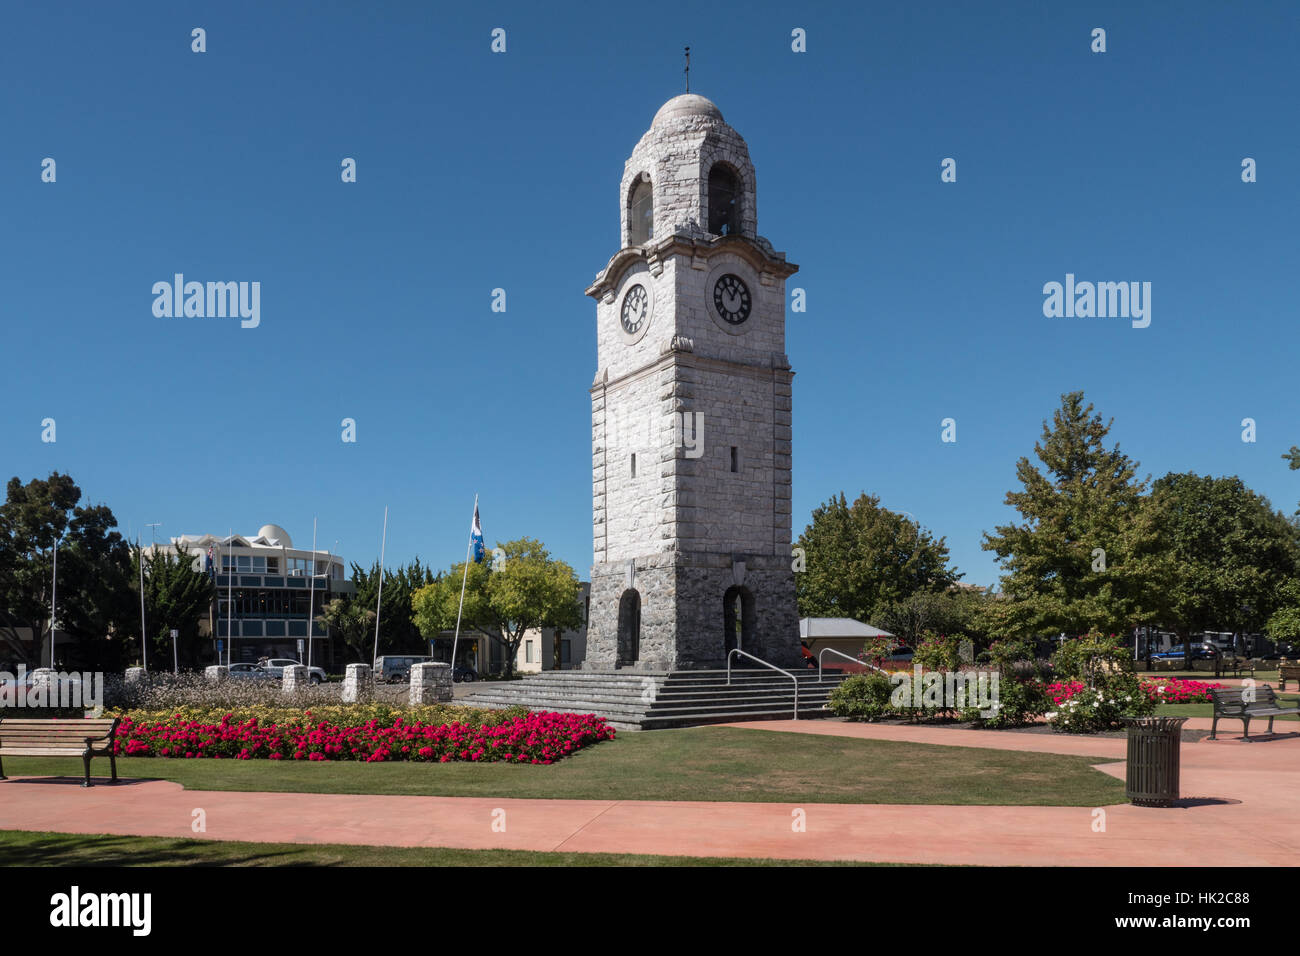 ANZAC memorial Bell Tower in Seymour Square, Blenheim.  South Island, New Zealand. Stock Photo